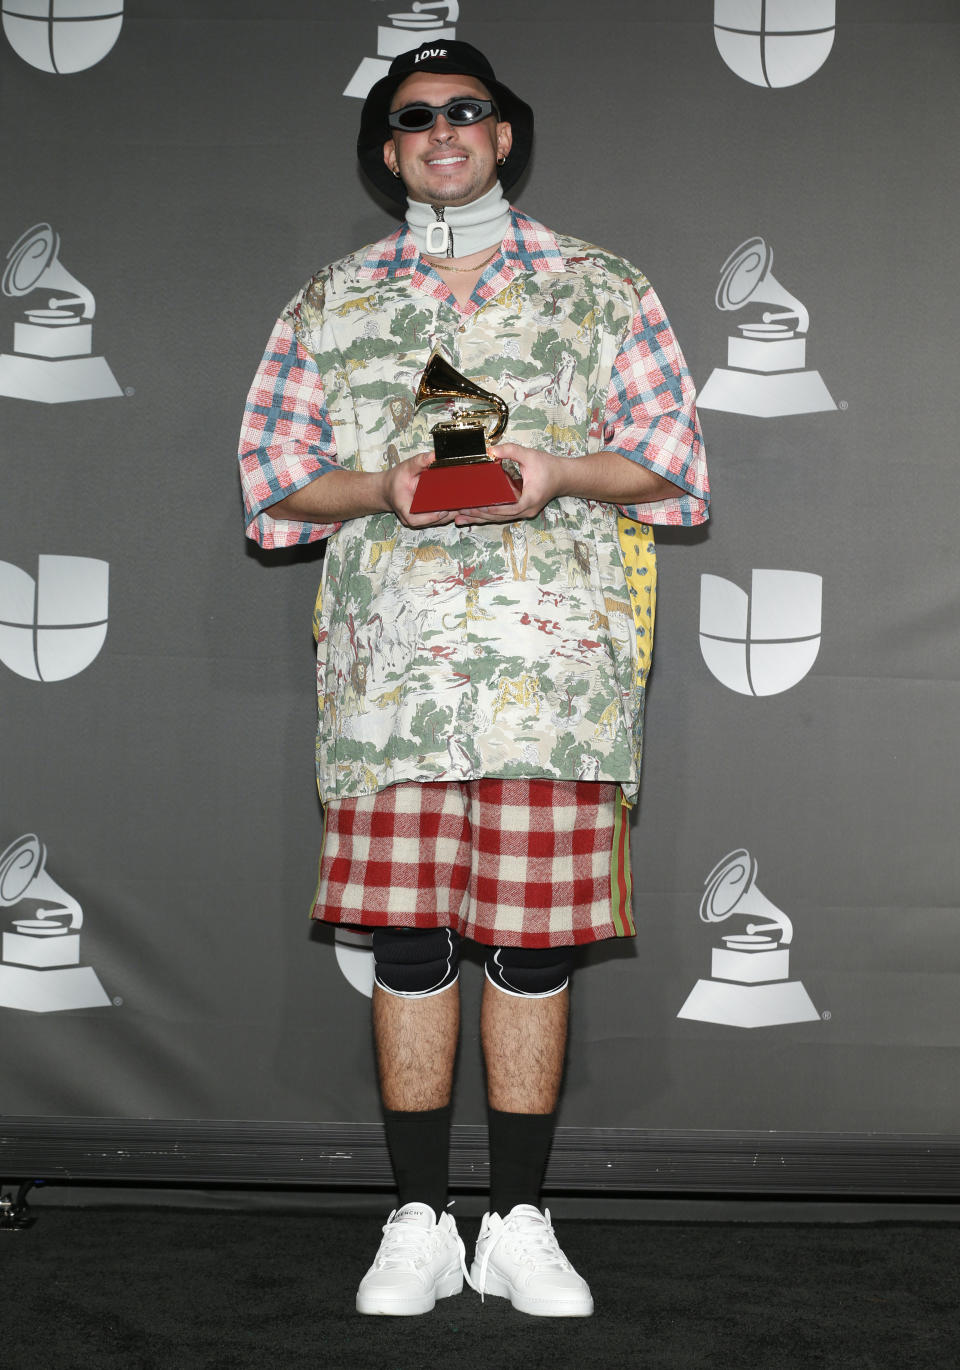 Bad Bunny poses in the press room with the award for best urban music album for "X 100Pre" at the 20th Latin Grammy Awards on Thursday, Nov. 14, 2019, at the MGM Grand Garden Arena in Las Vegas. (Photo by Eric Jamison/Invision/AP)